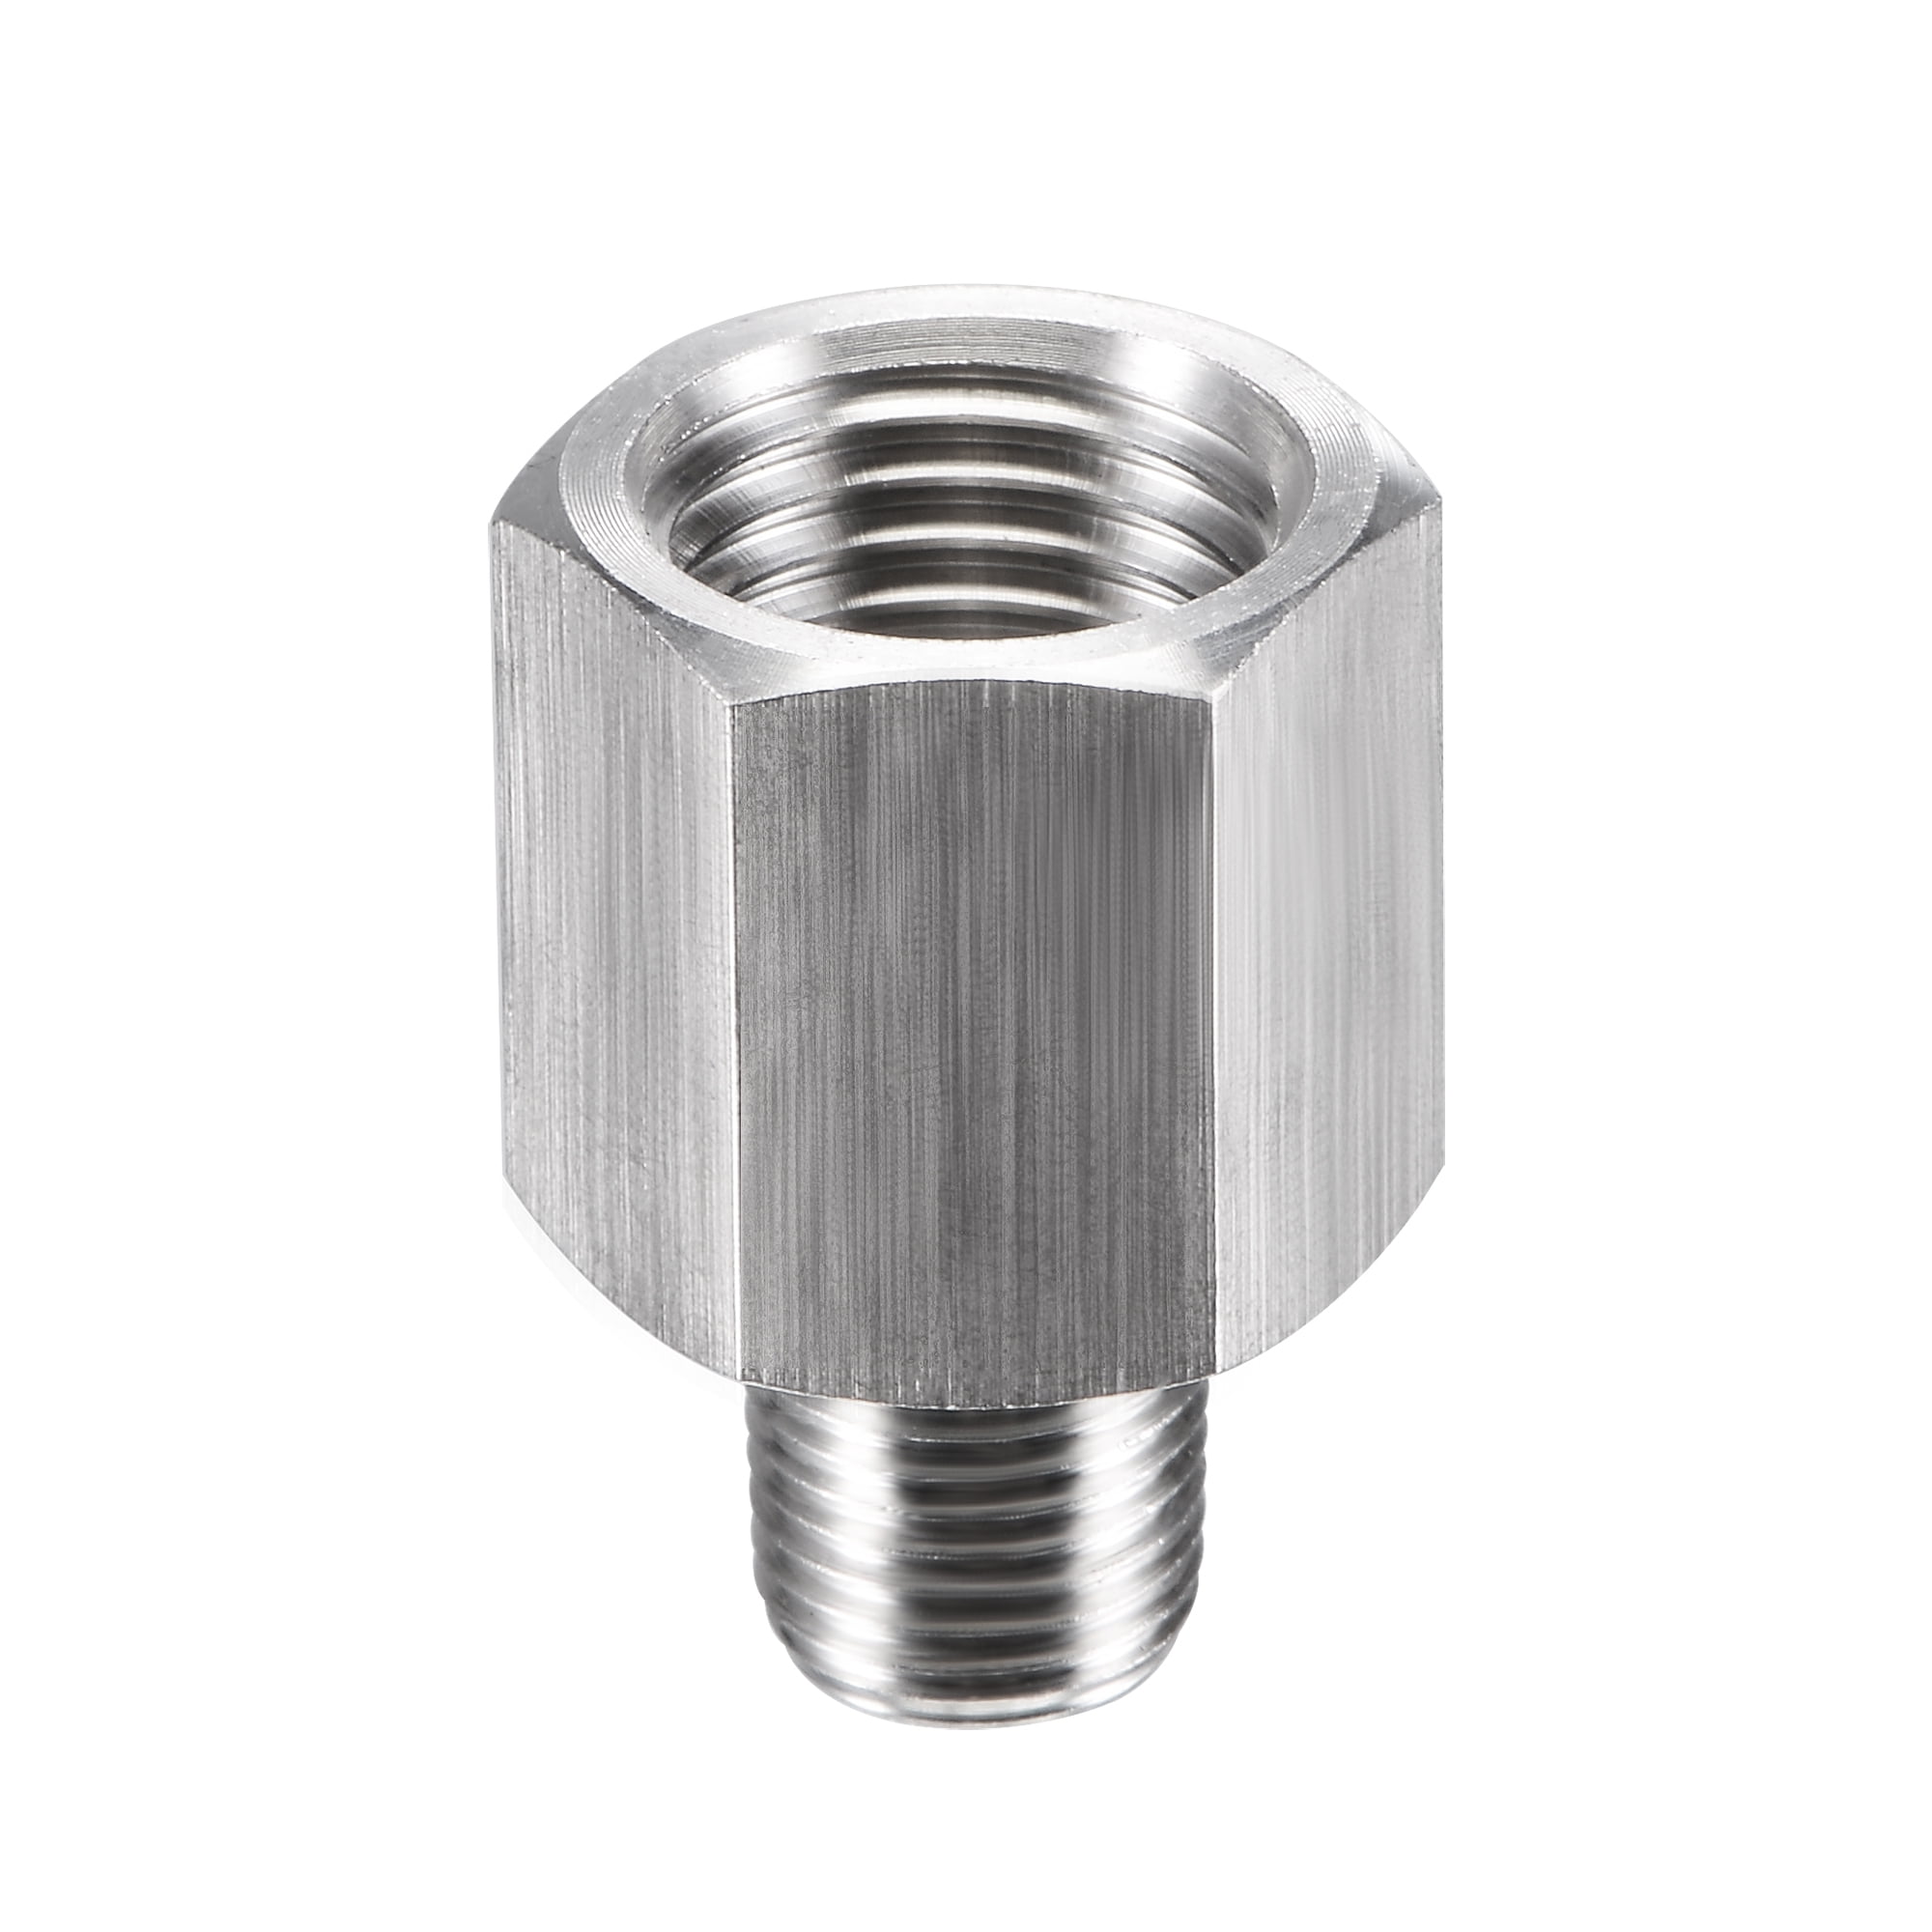 Steel Adapter Fitting 1/8 Inch Male to 1/4 Inch Male NPT 